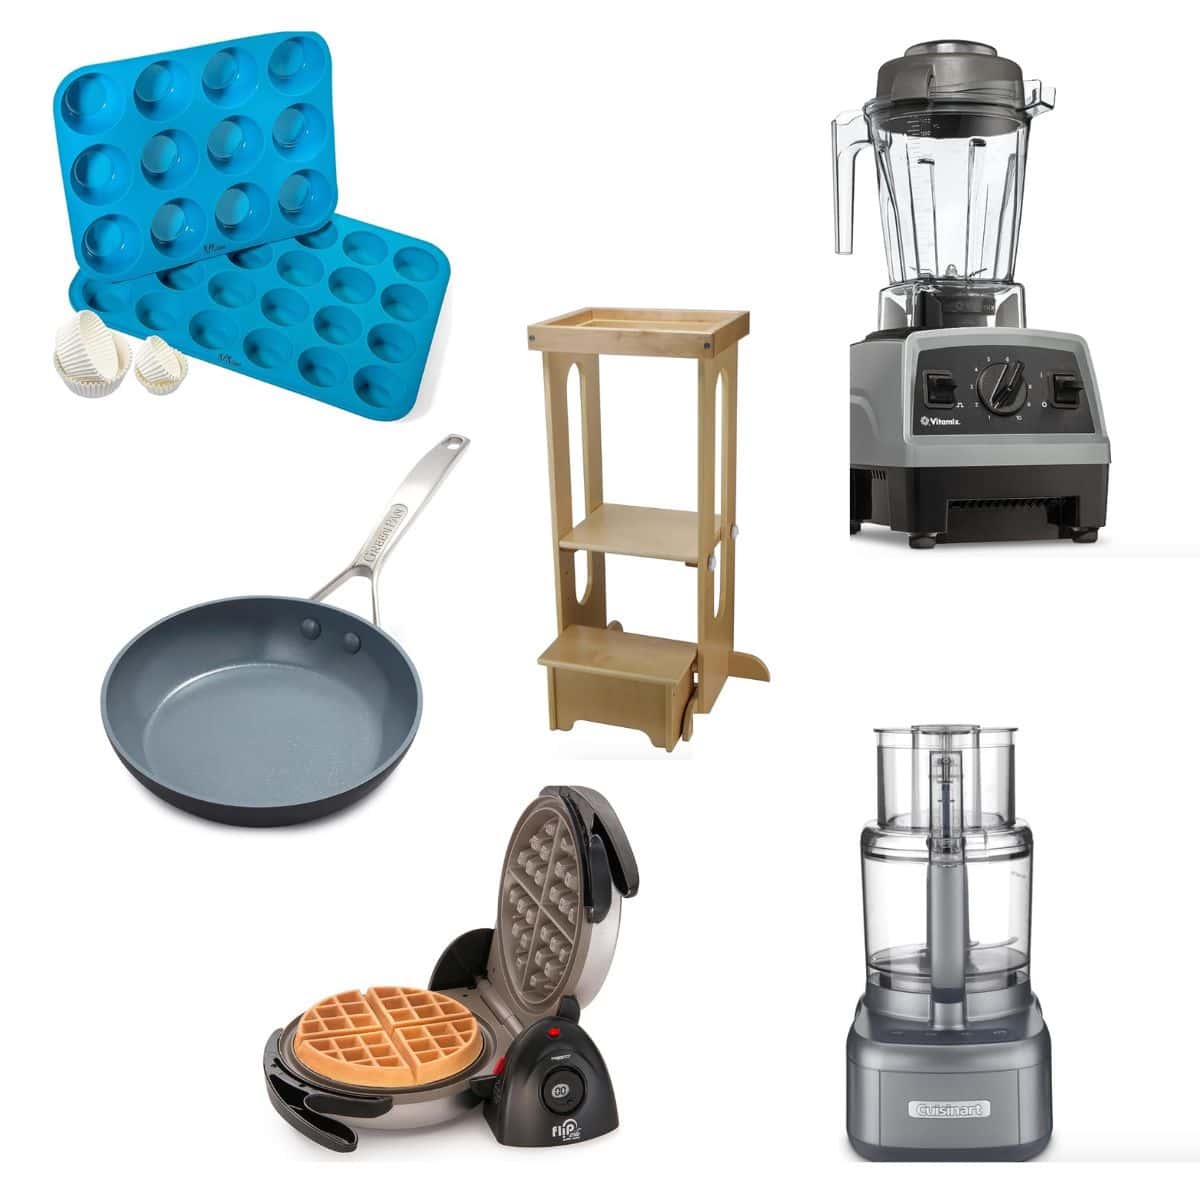 Favorite Kitchen Must-Haves - MJ and Hungryman